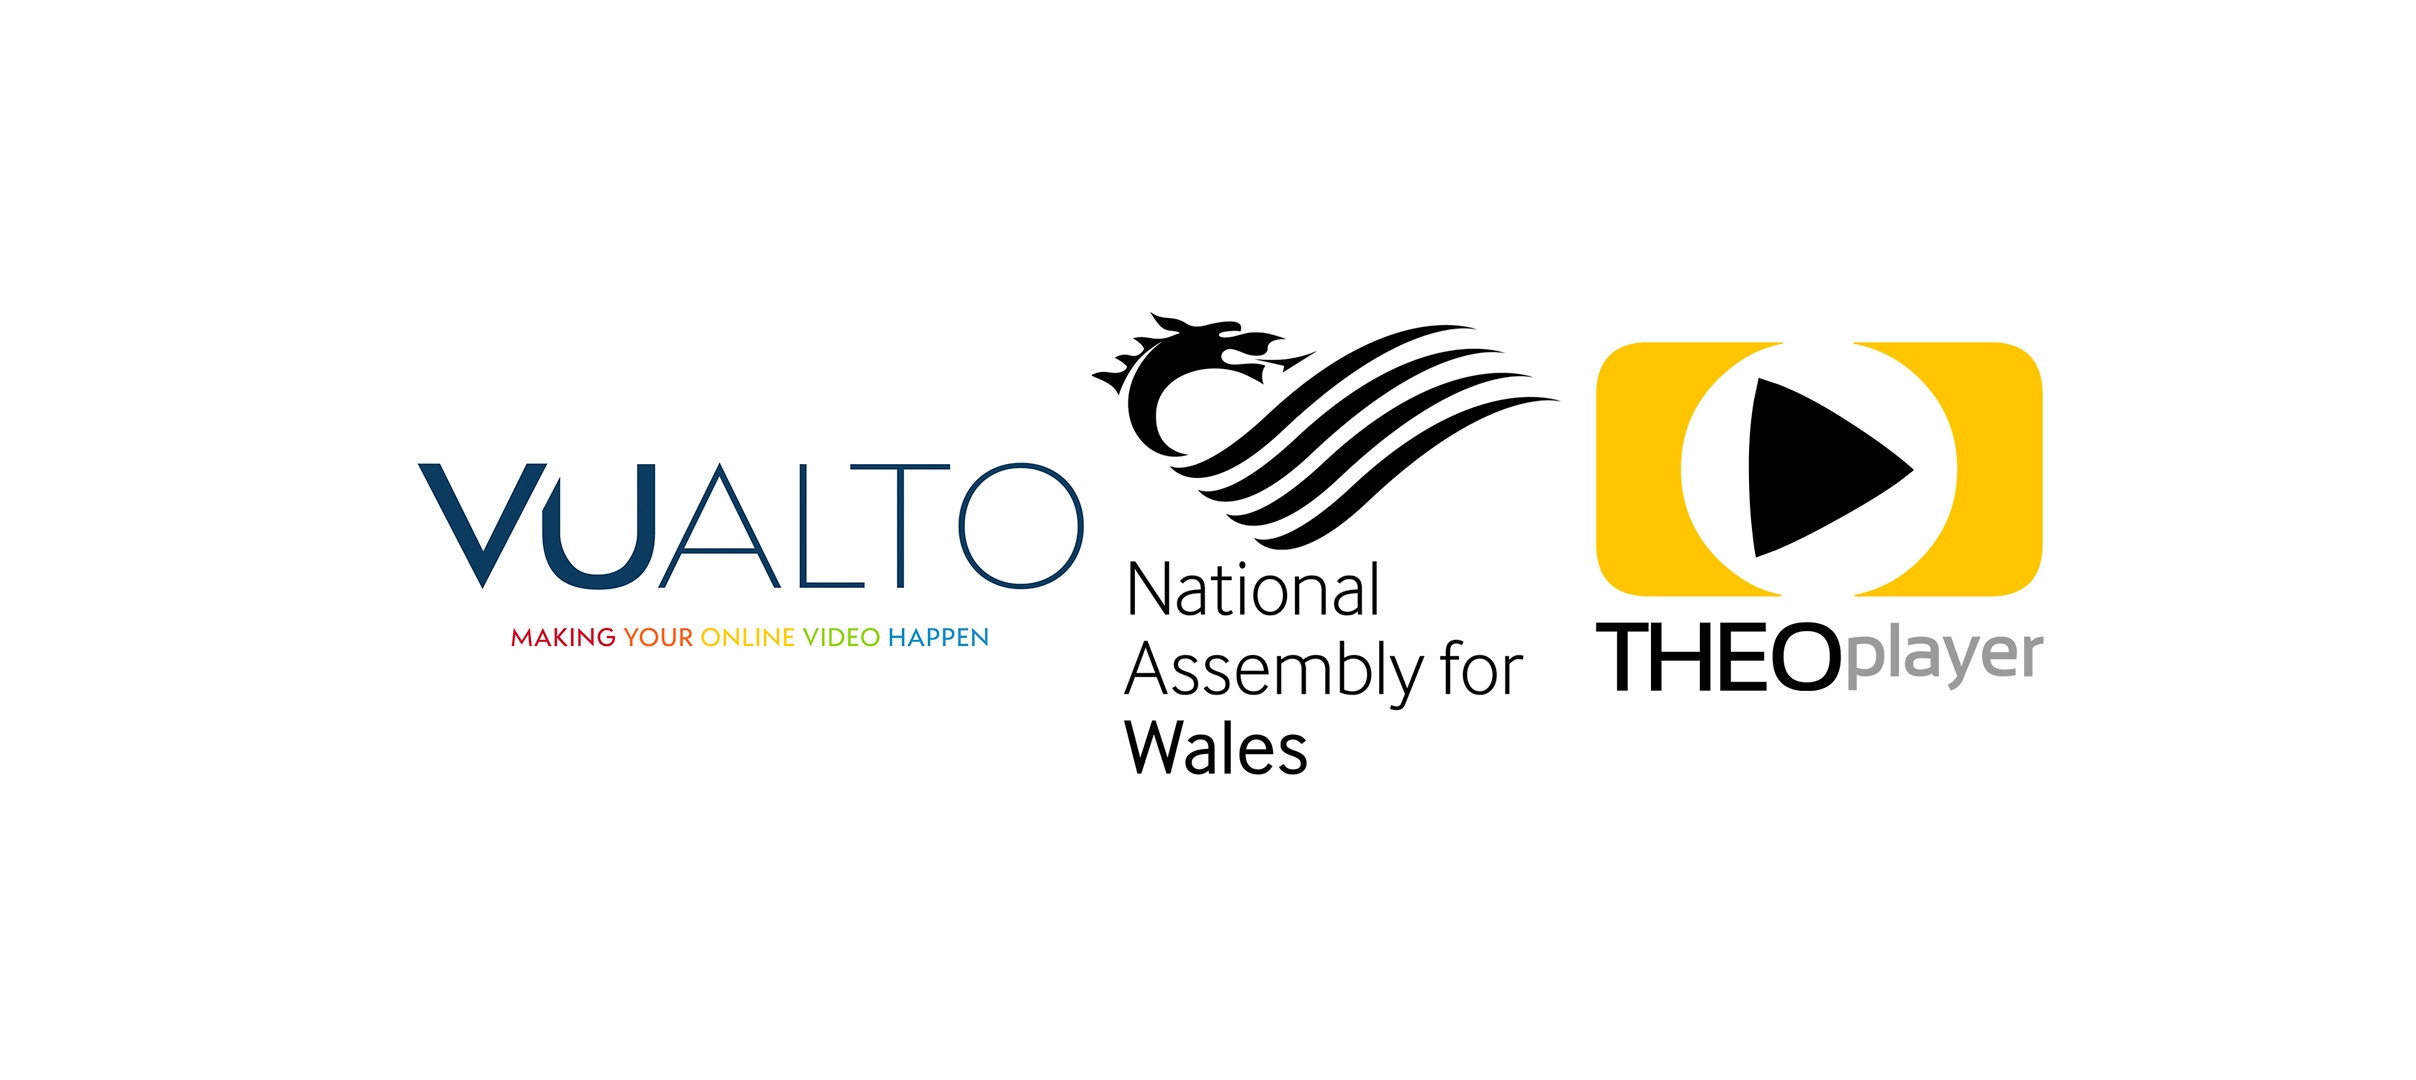 Case Study: The National Assembly of Wales